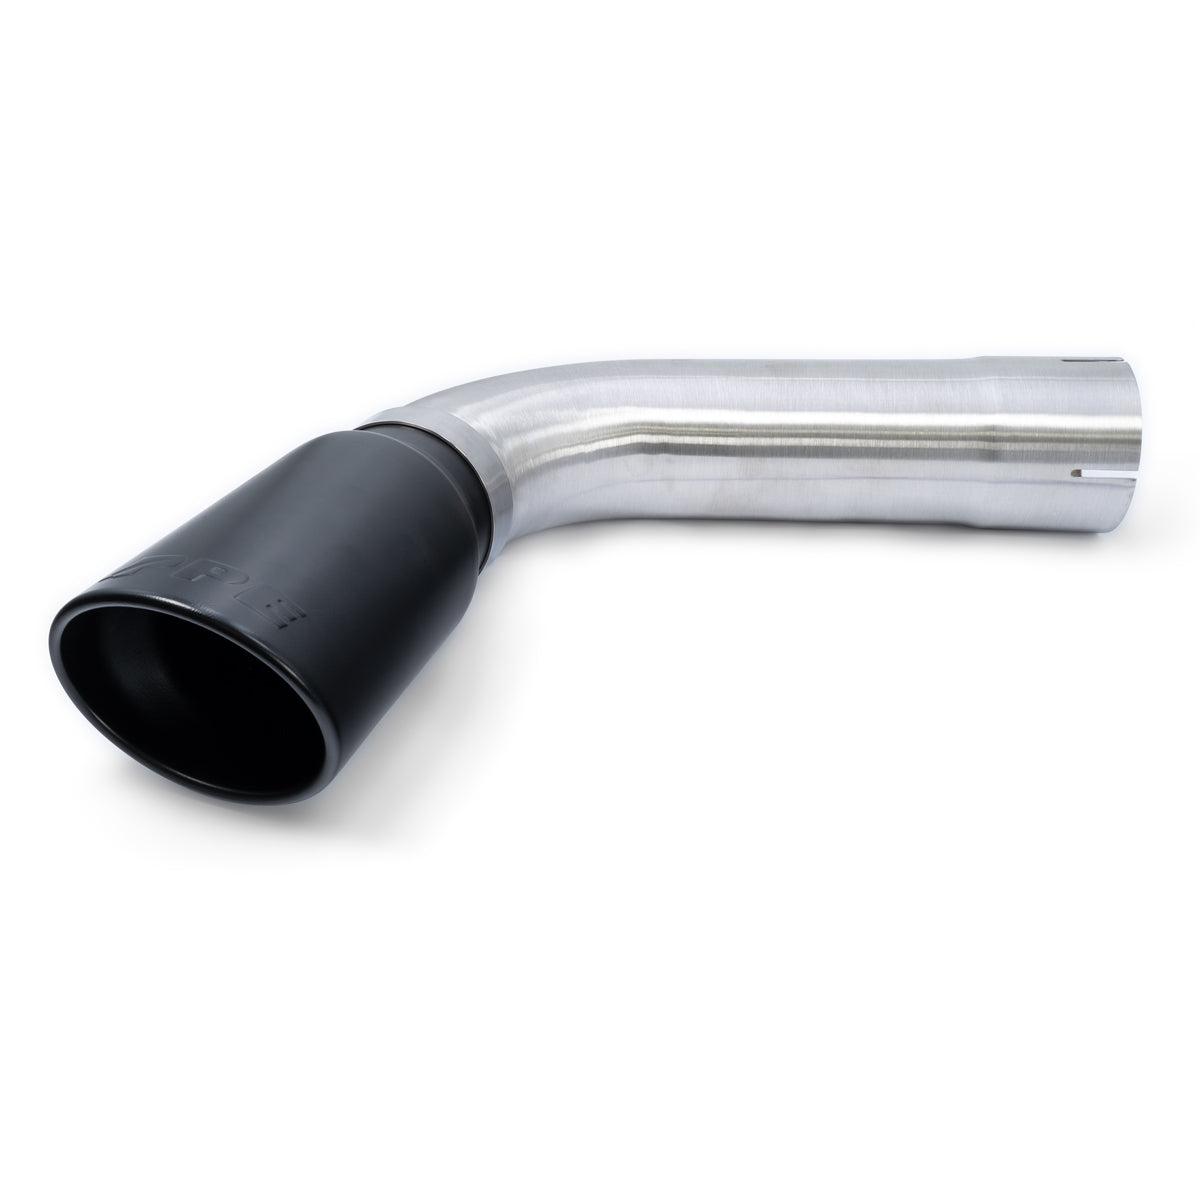 PPE Diesel 2007-2019 GM 6.6L Duramax 304 Stainless Steel Four Inch Performance Exhaust Upgrade Black 117020120